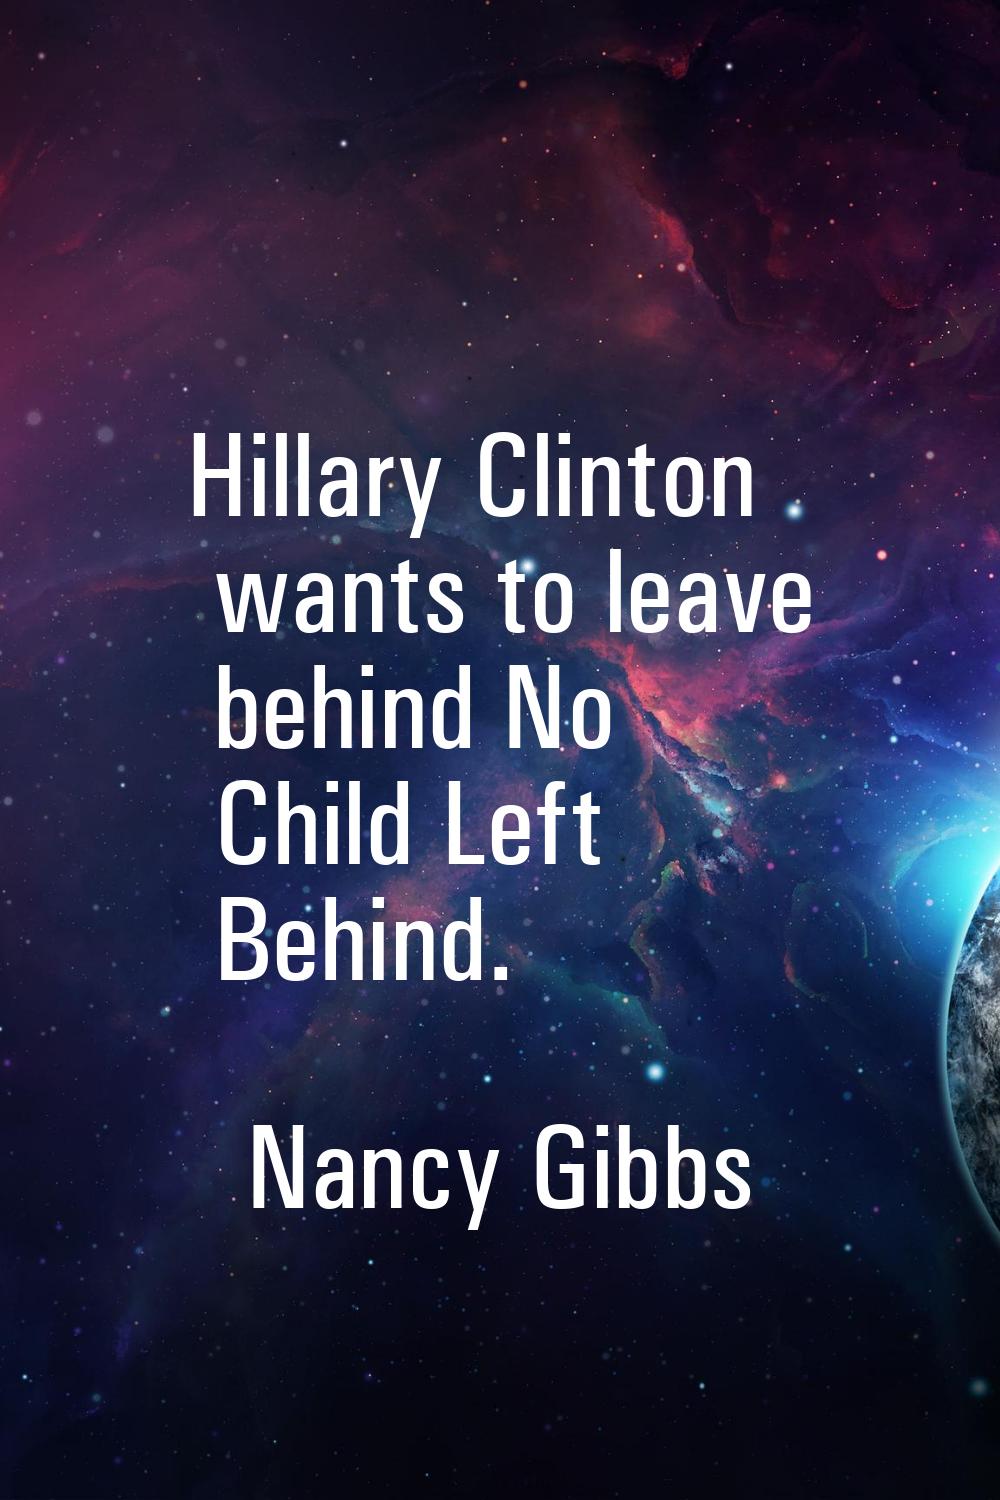 Hillary Clinton wants to leave behind No Child Left Behind.